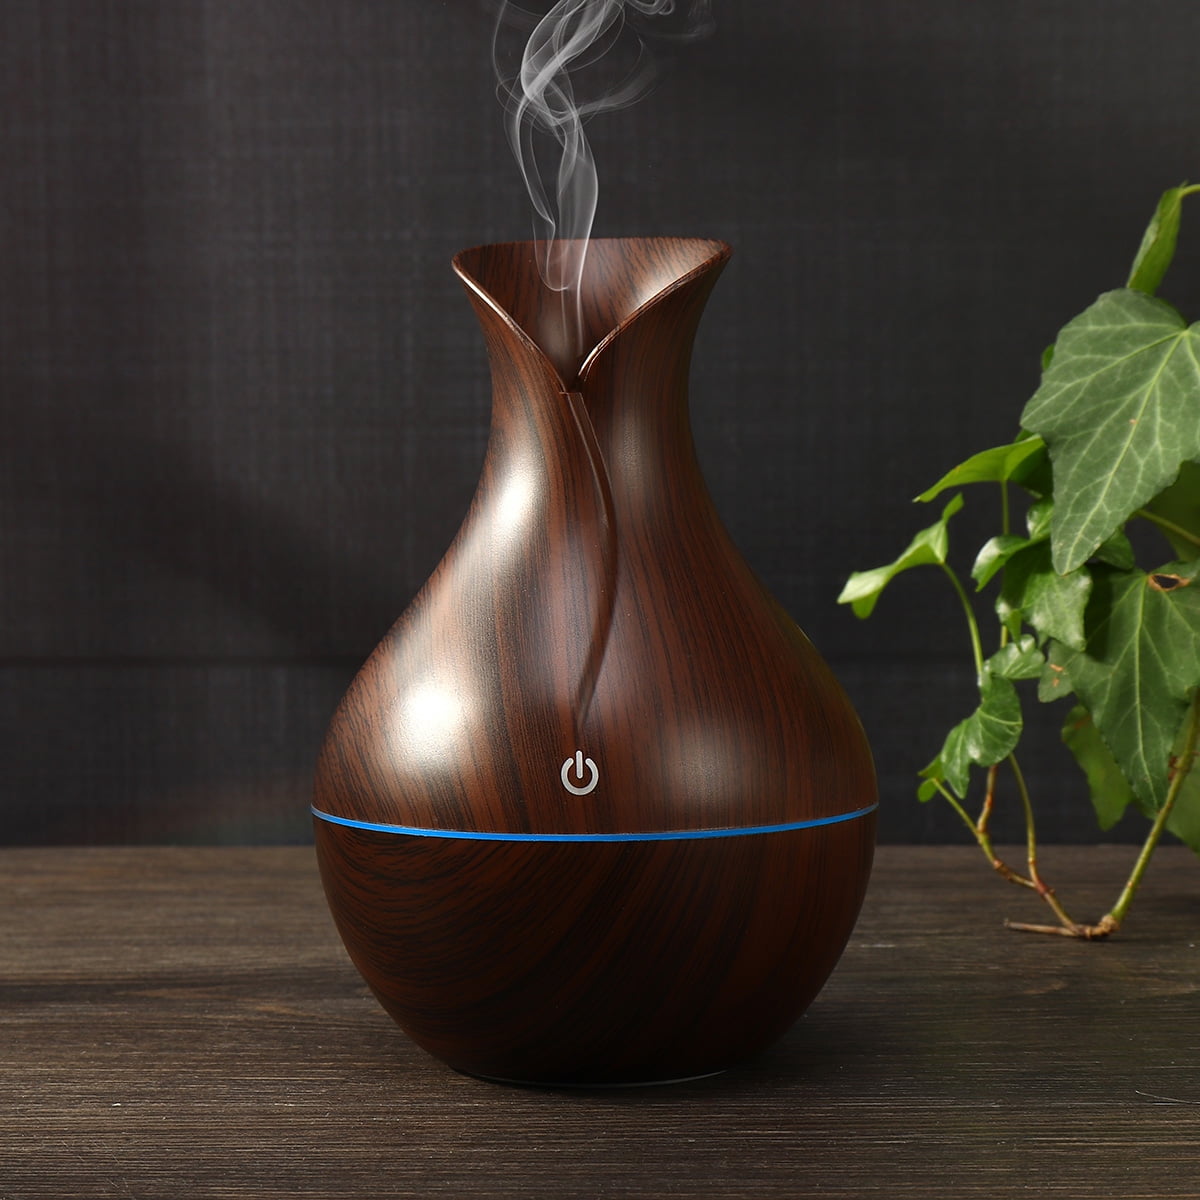 KBAYBO Essential Oil Diffuser 400ml Wood Grain Aromatherapy Diffuser Ultrasonic Cool Mist Humidifiers Whisper Quiet 7 Color Changing Lights 4 Timer Settings Mist Adjustment for Home Office Bedroom 